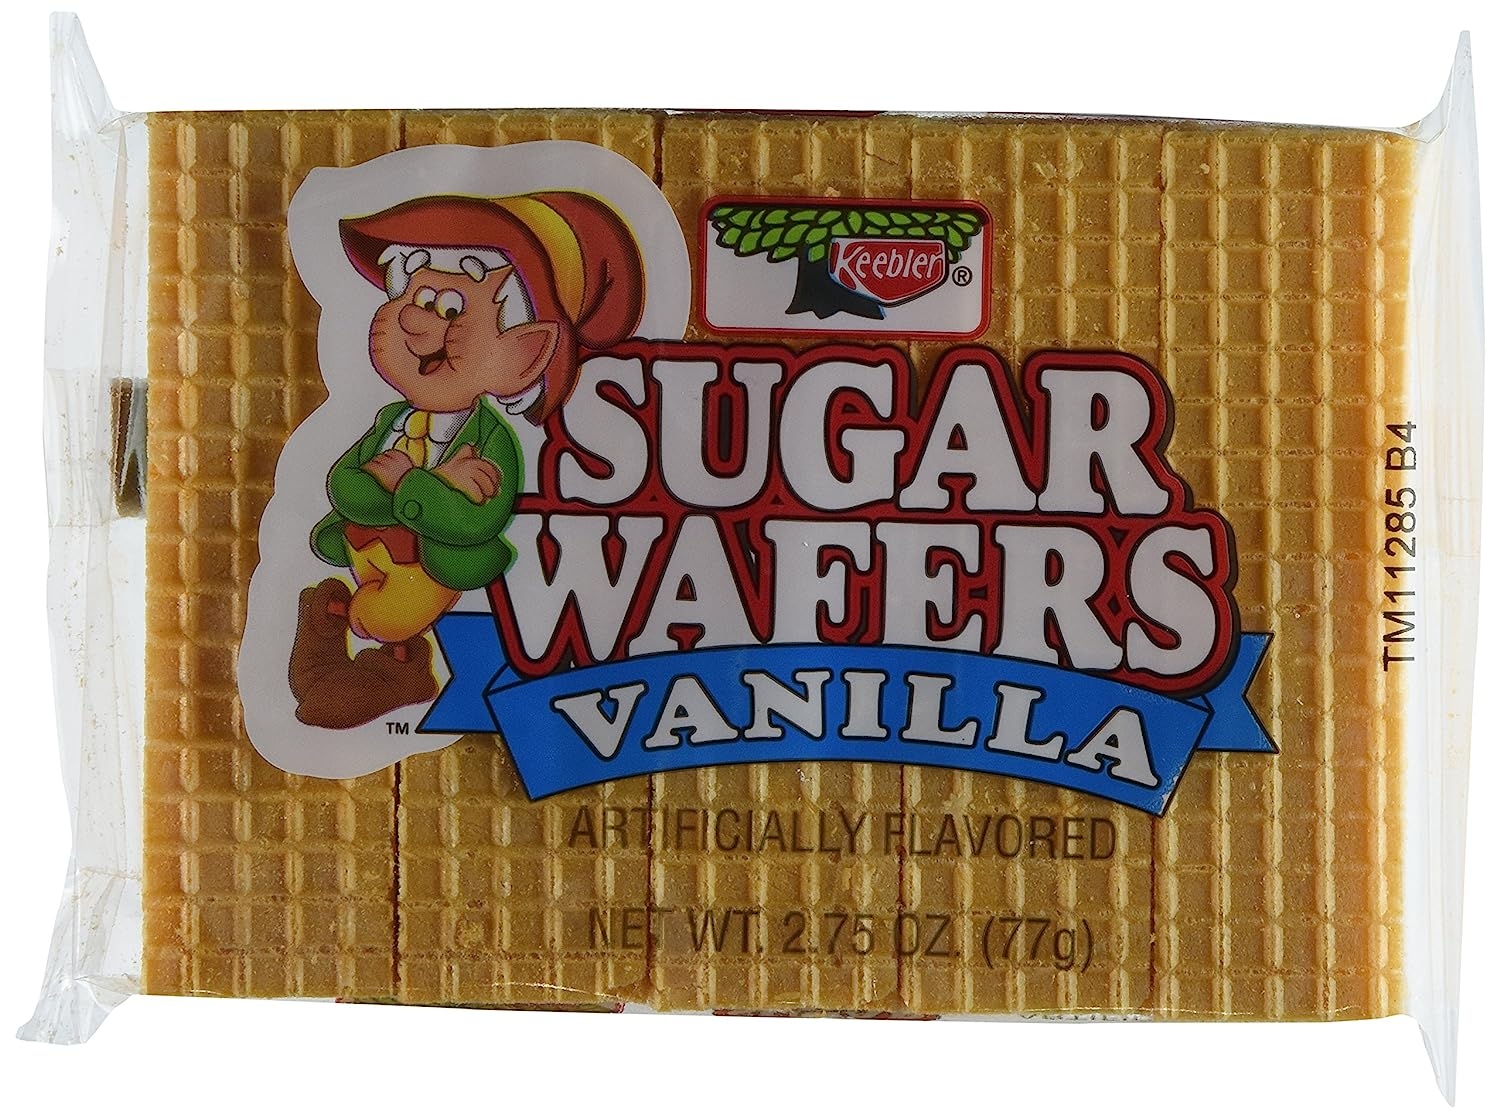 Keebler Sugar Wafers Twelve, Strawberry, 2.75 Ounce (Pack of 12), 33 Ounce   price checker   price checker Description Gallery